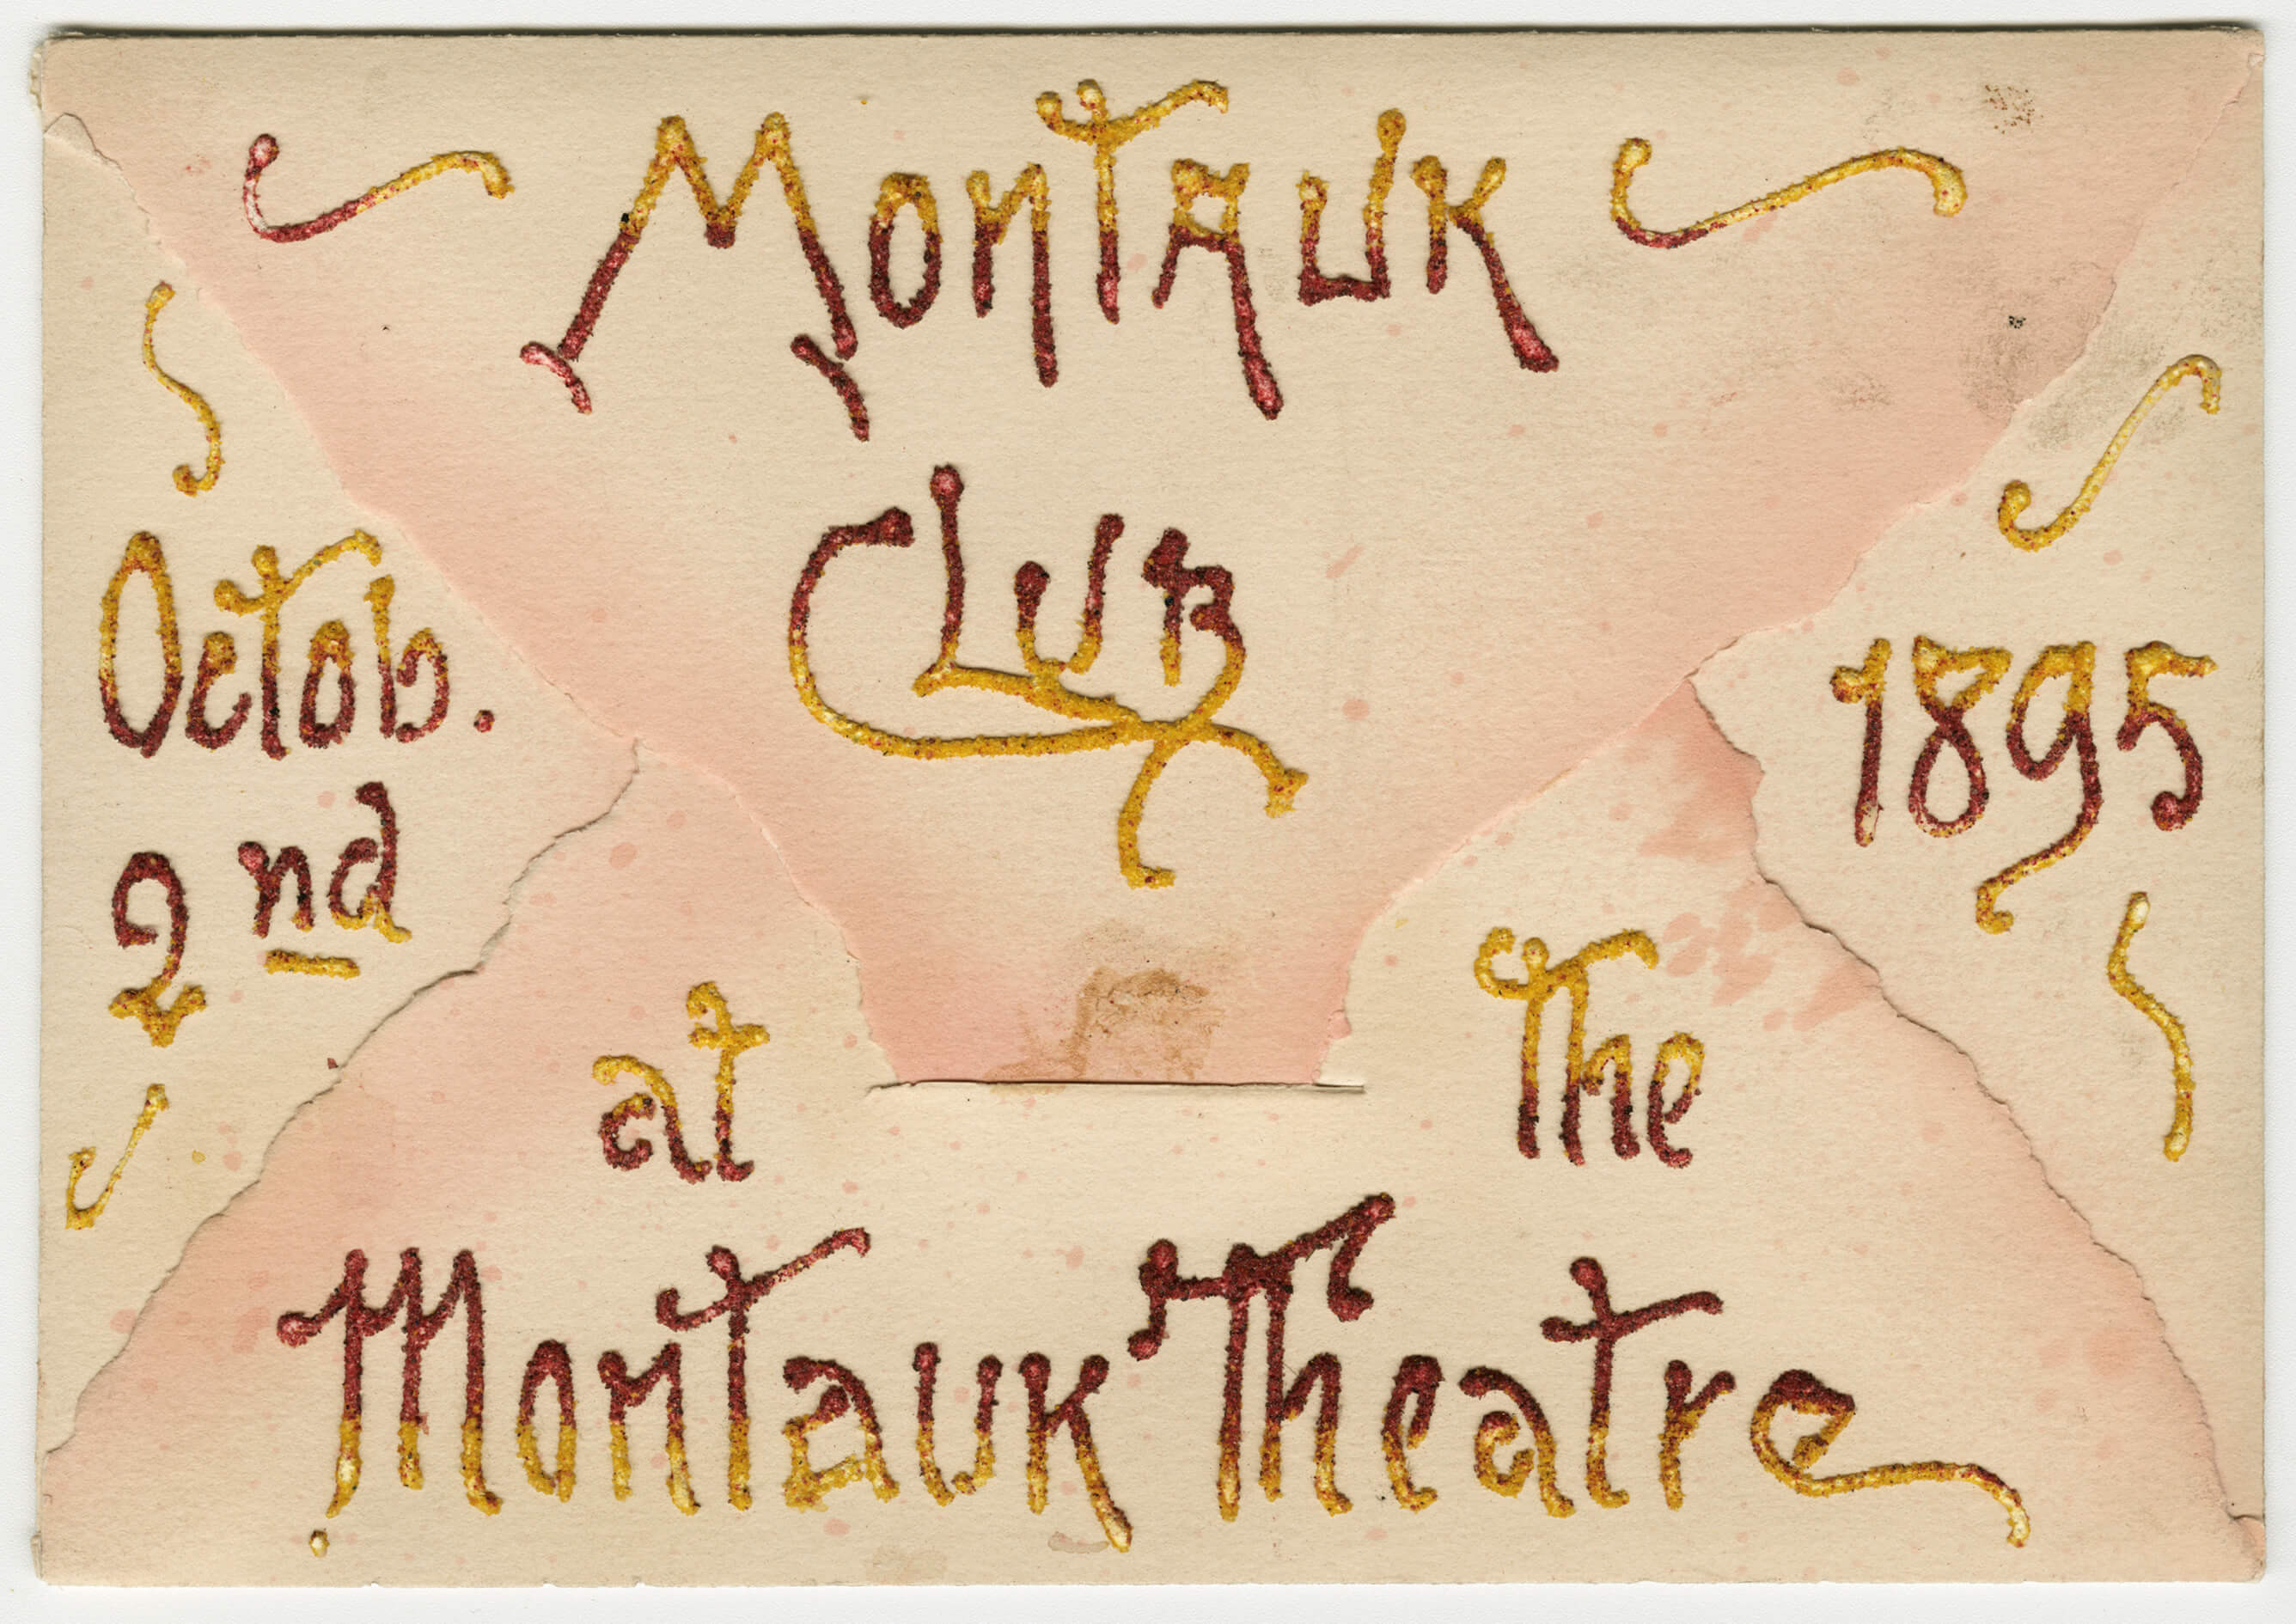 Envelope for invitation to event at the Montauk Theatre at the Montauk Club in 1895. Image via Montauk Club Collection, Brooklyn Public Library